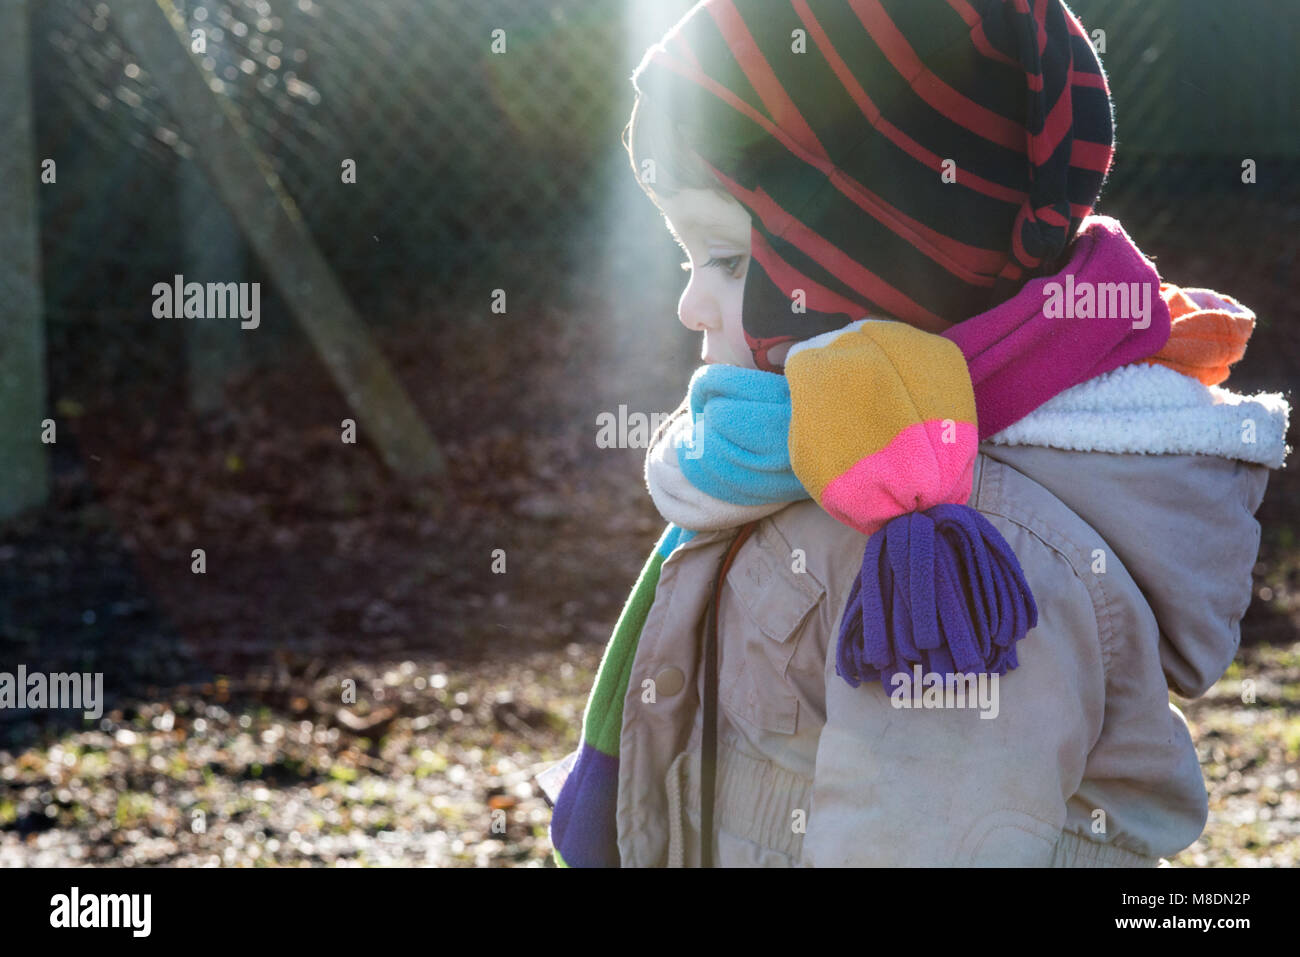 Male toddler in knit hat and scarf looking down in park Stock Photo